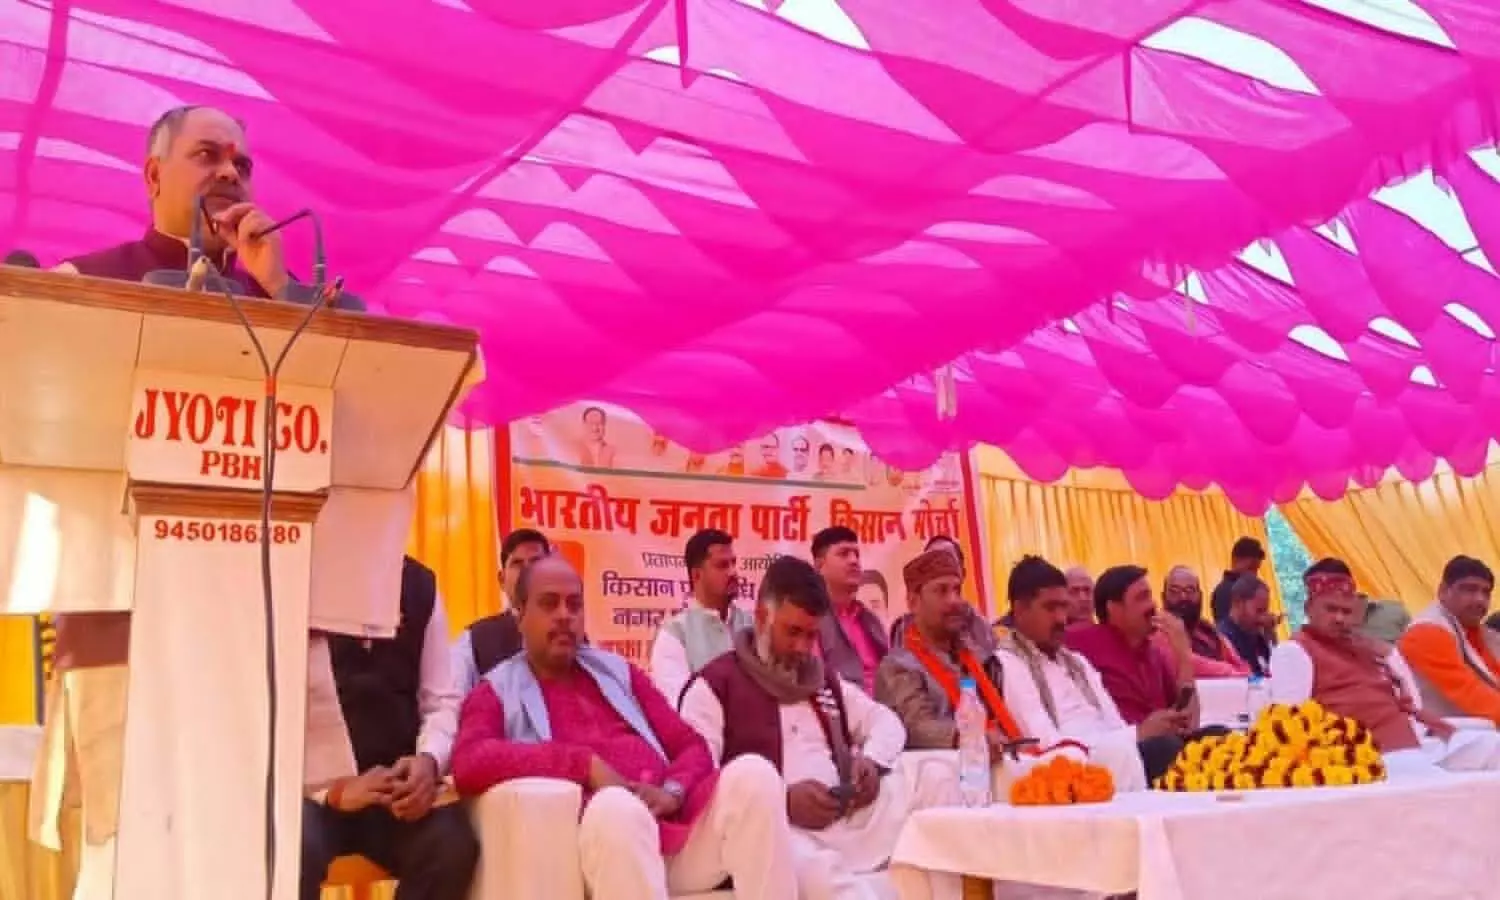 BJP made complete preparations for the election of Nagar Panchayat in Pratapgarh